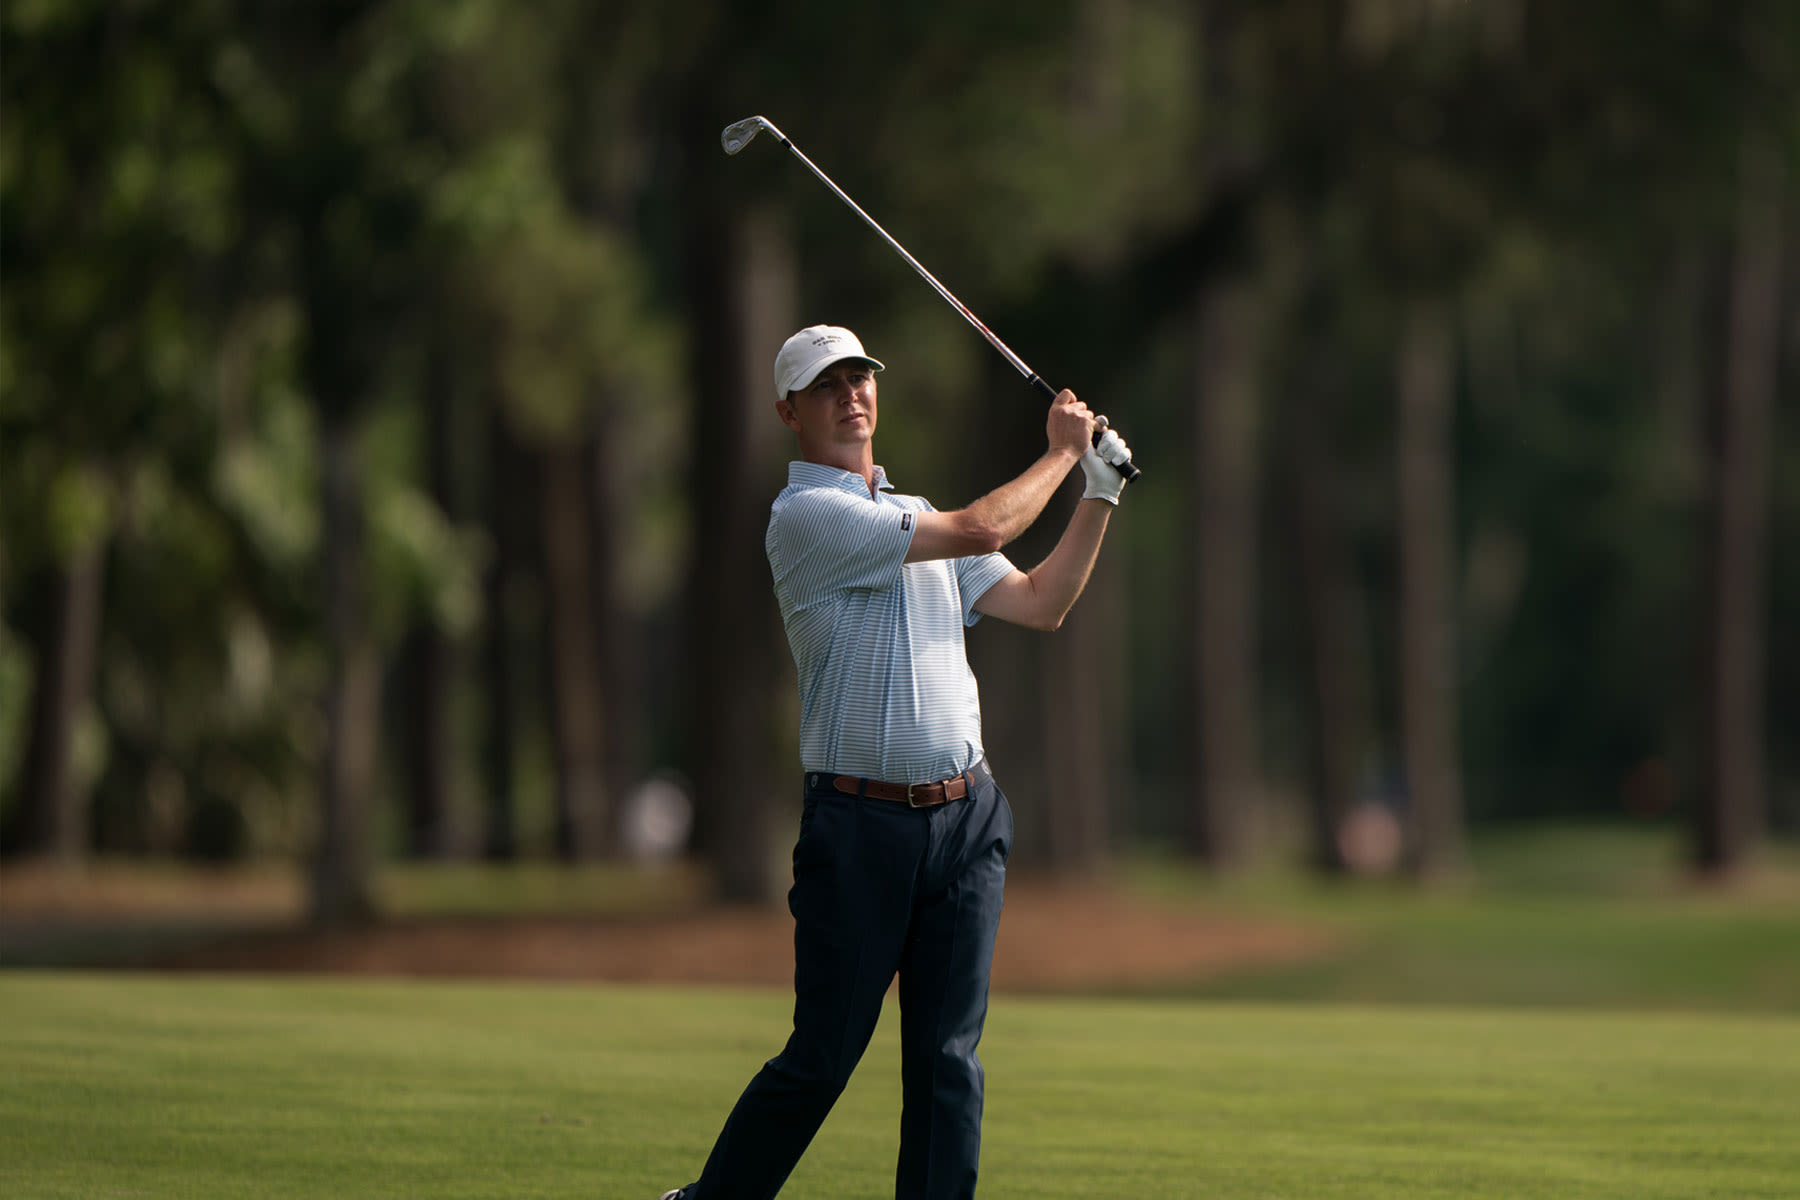 Ballard competed in the 2019 PGA Professional Championship in South Carolina.

